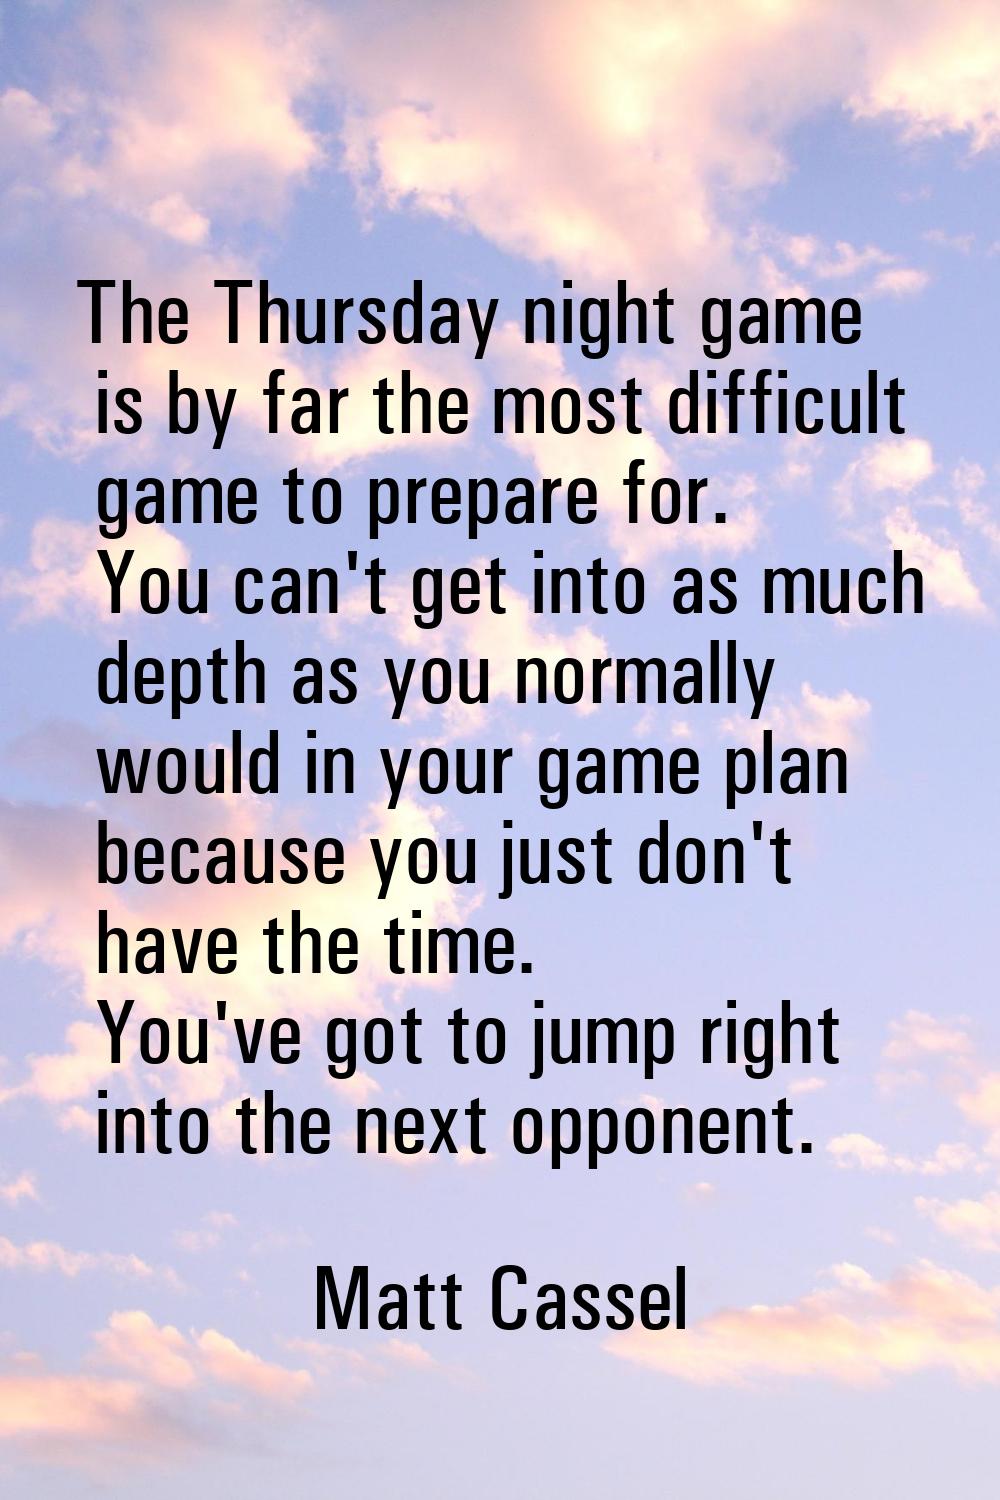 The Thursday night game is by far the most difficult game to prepare for. You can't get into as muc